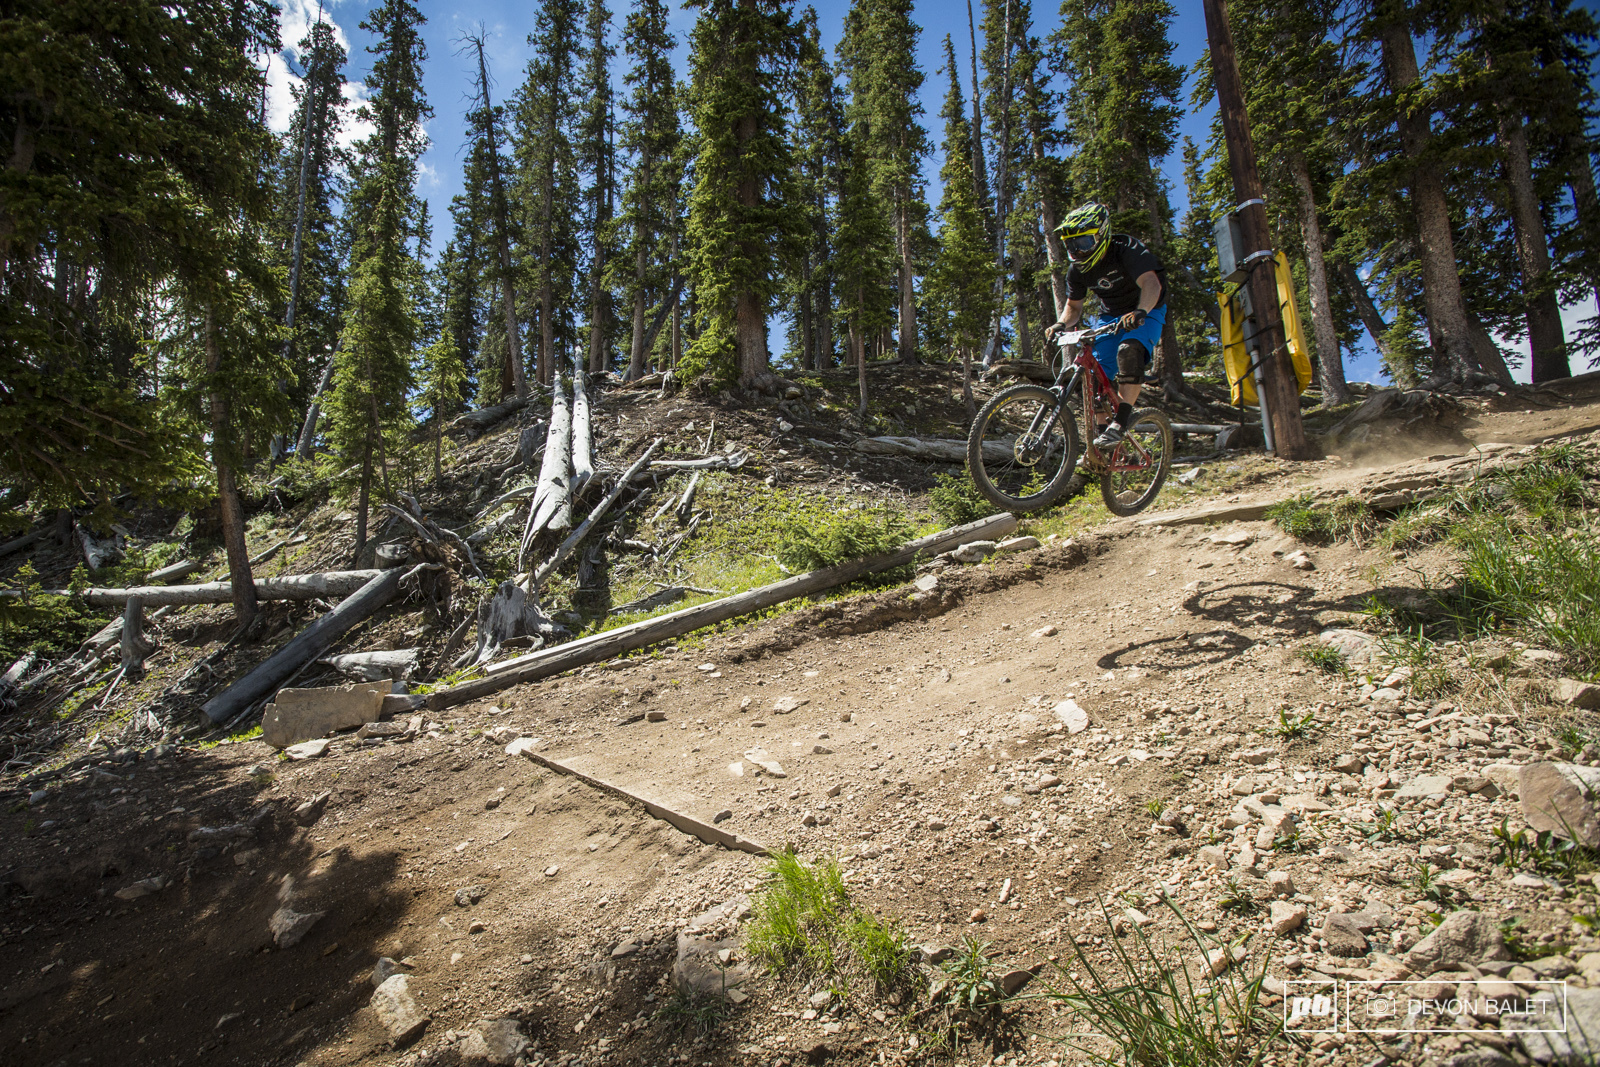 Trevor Martin of Telluride, Colorado finds the smooth line into the start of stage two.